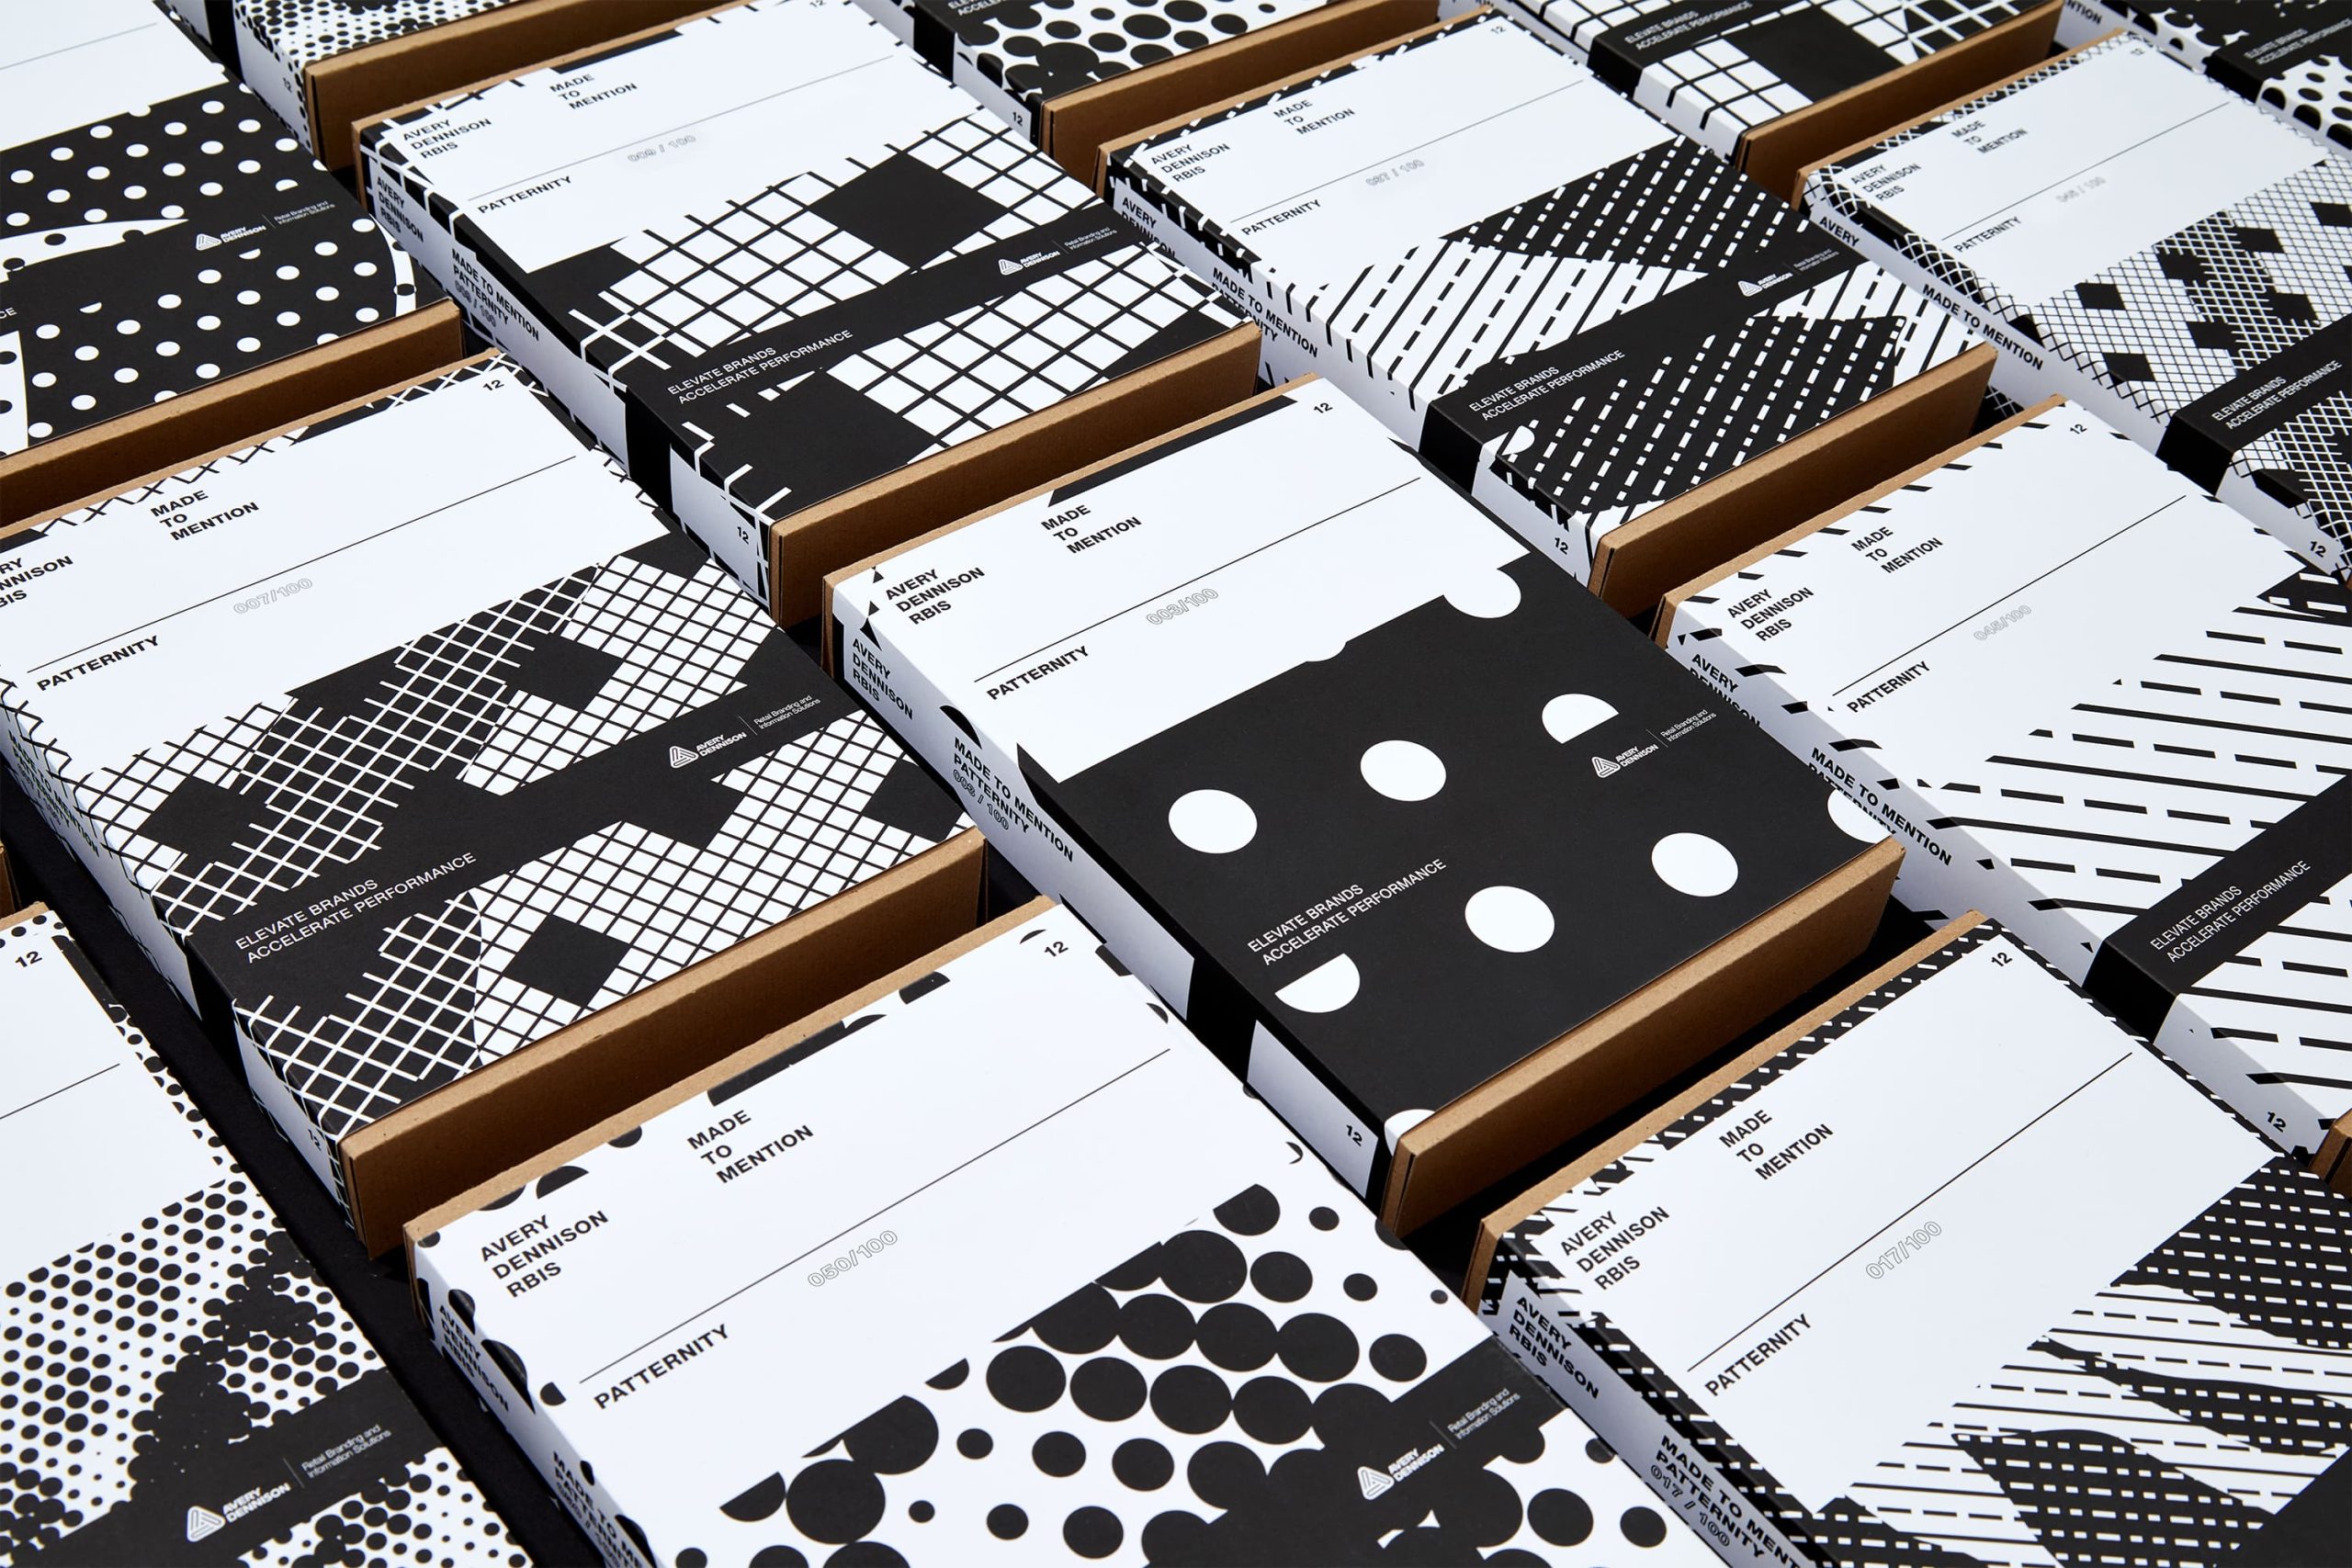 Avery Dennison collaboration with Patternity. Boxes containing lables